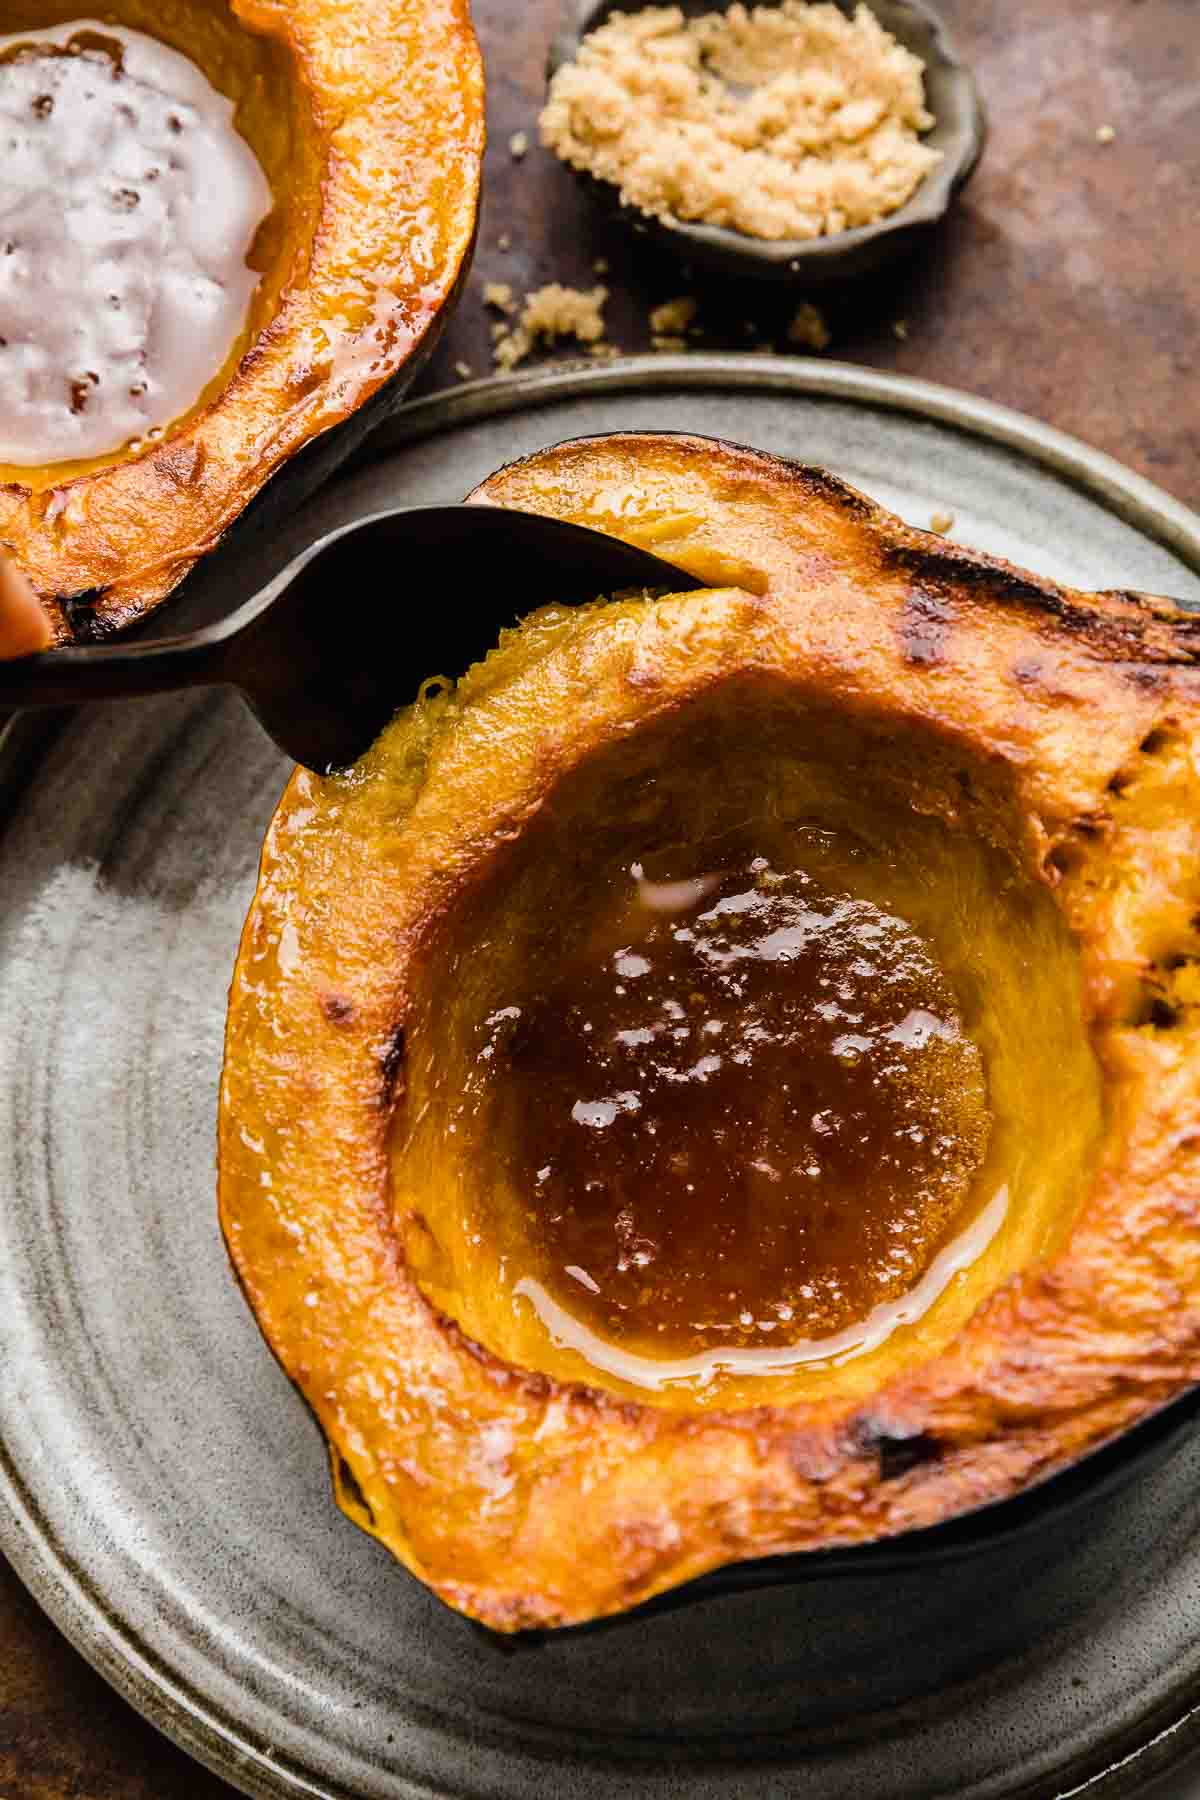 Roasted acorn squash with buttery brown sugar in the center of the squash, and a spoon scooping out the squash flesh.